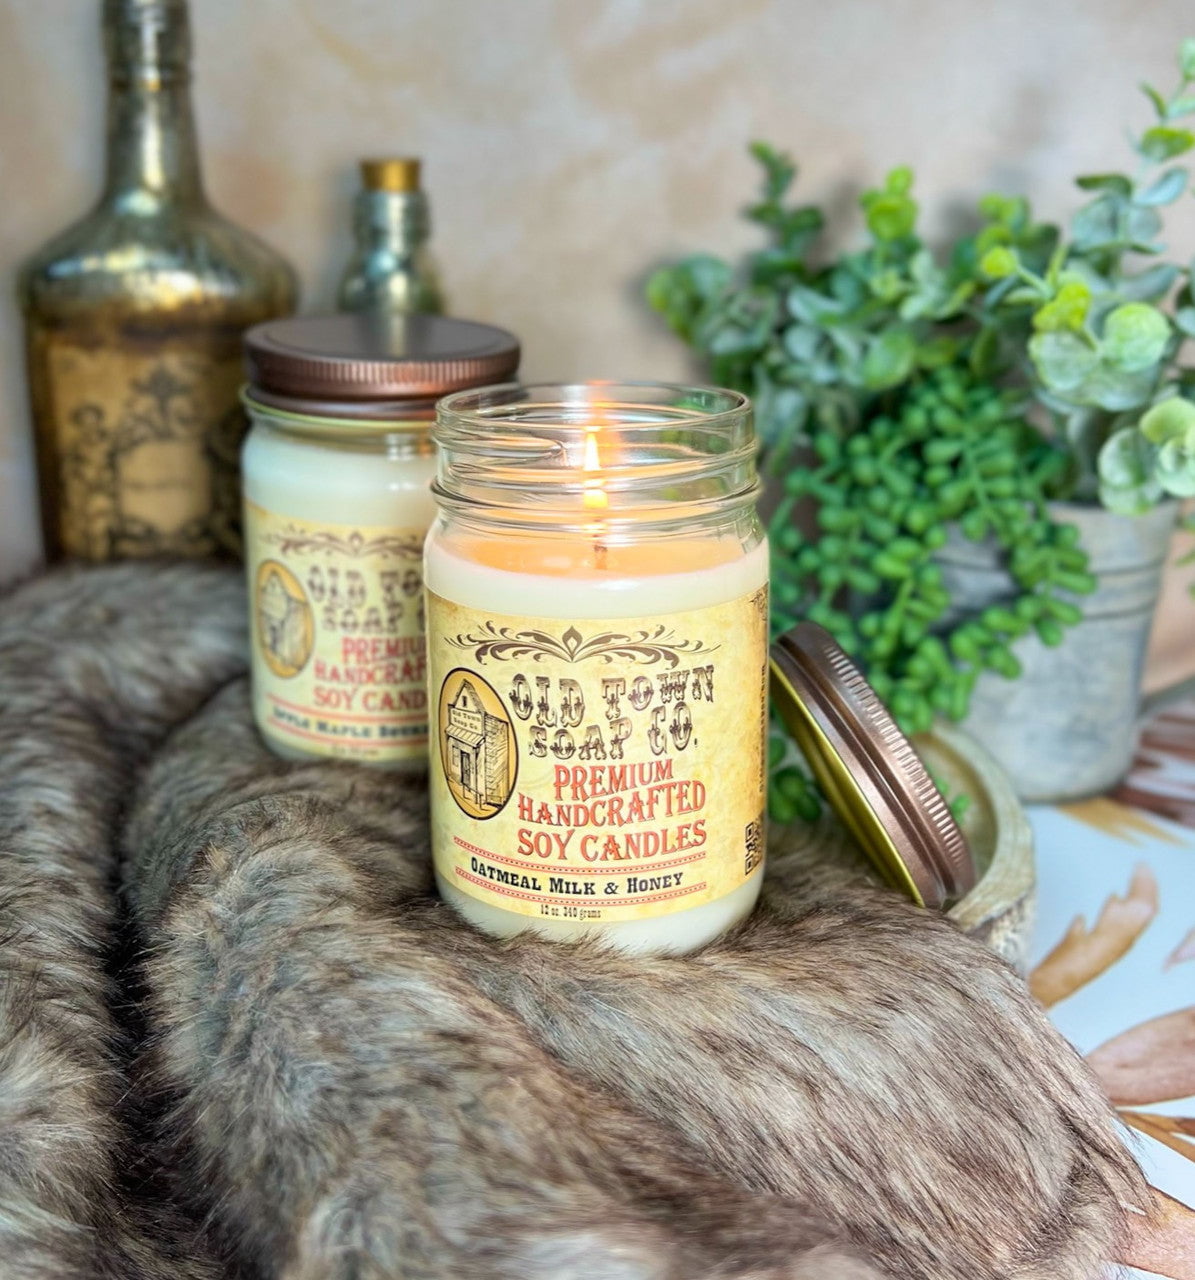 The Cowboy - 12oz. Candle - Old Town Soap Co.